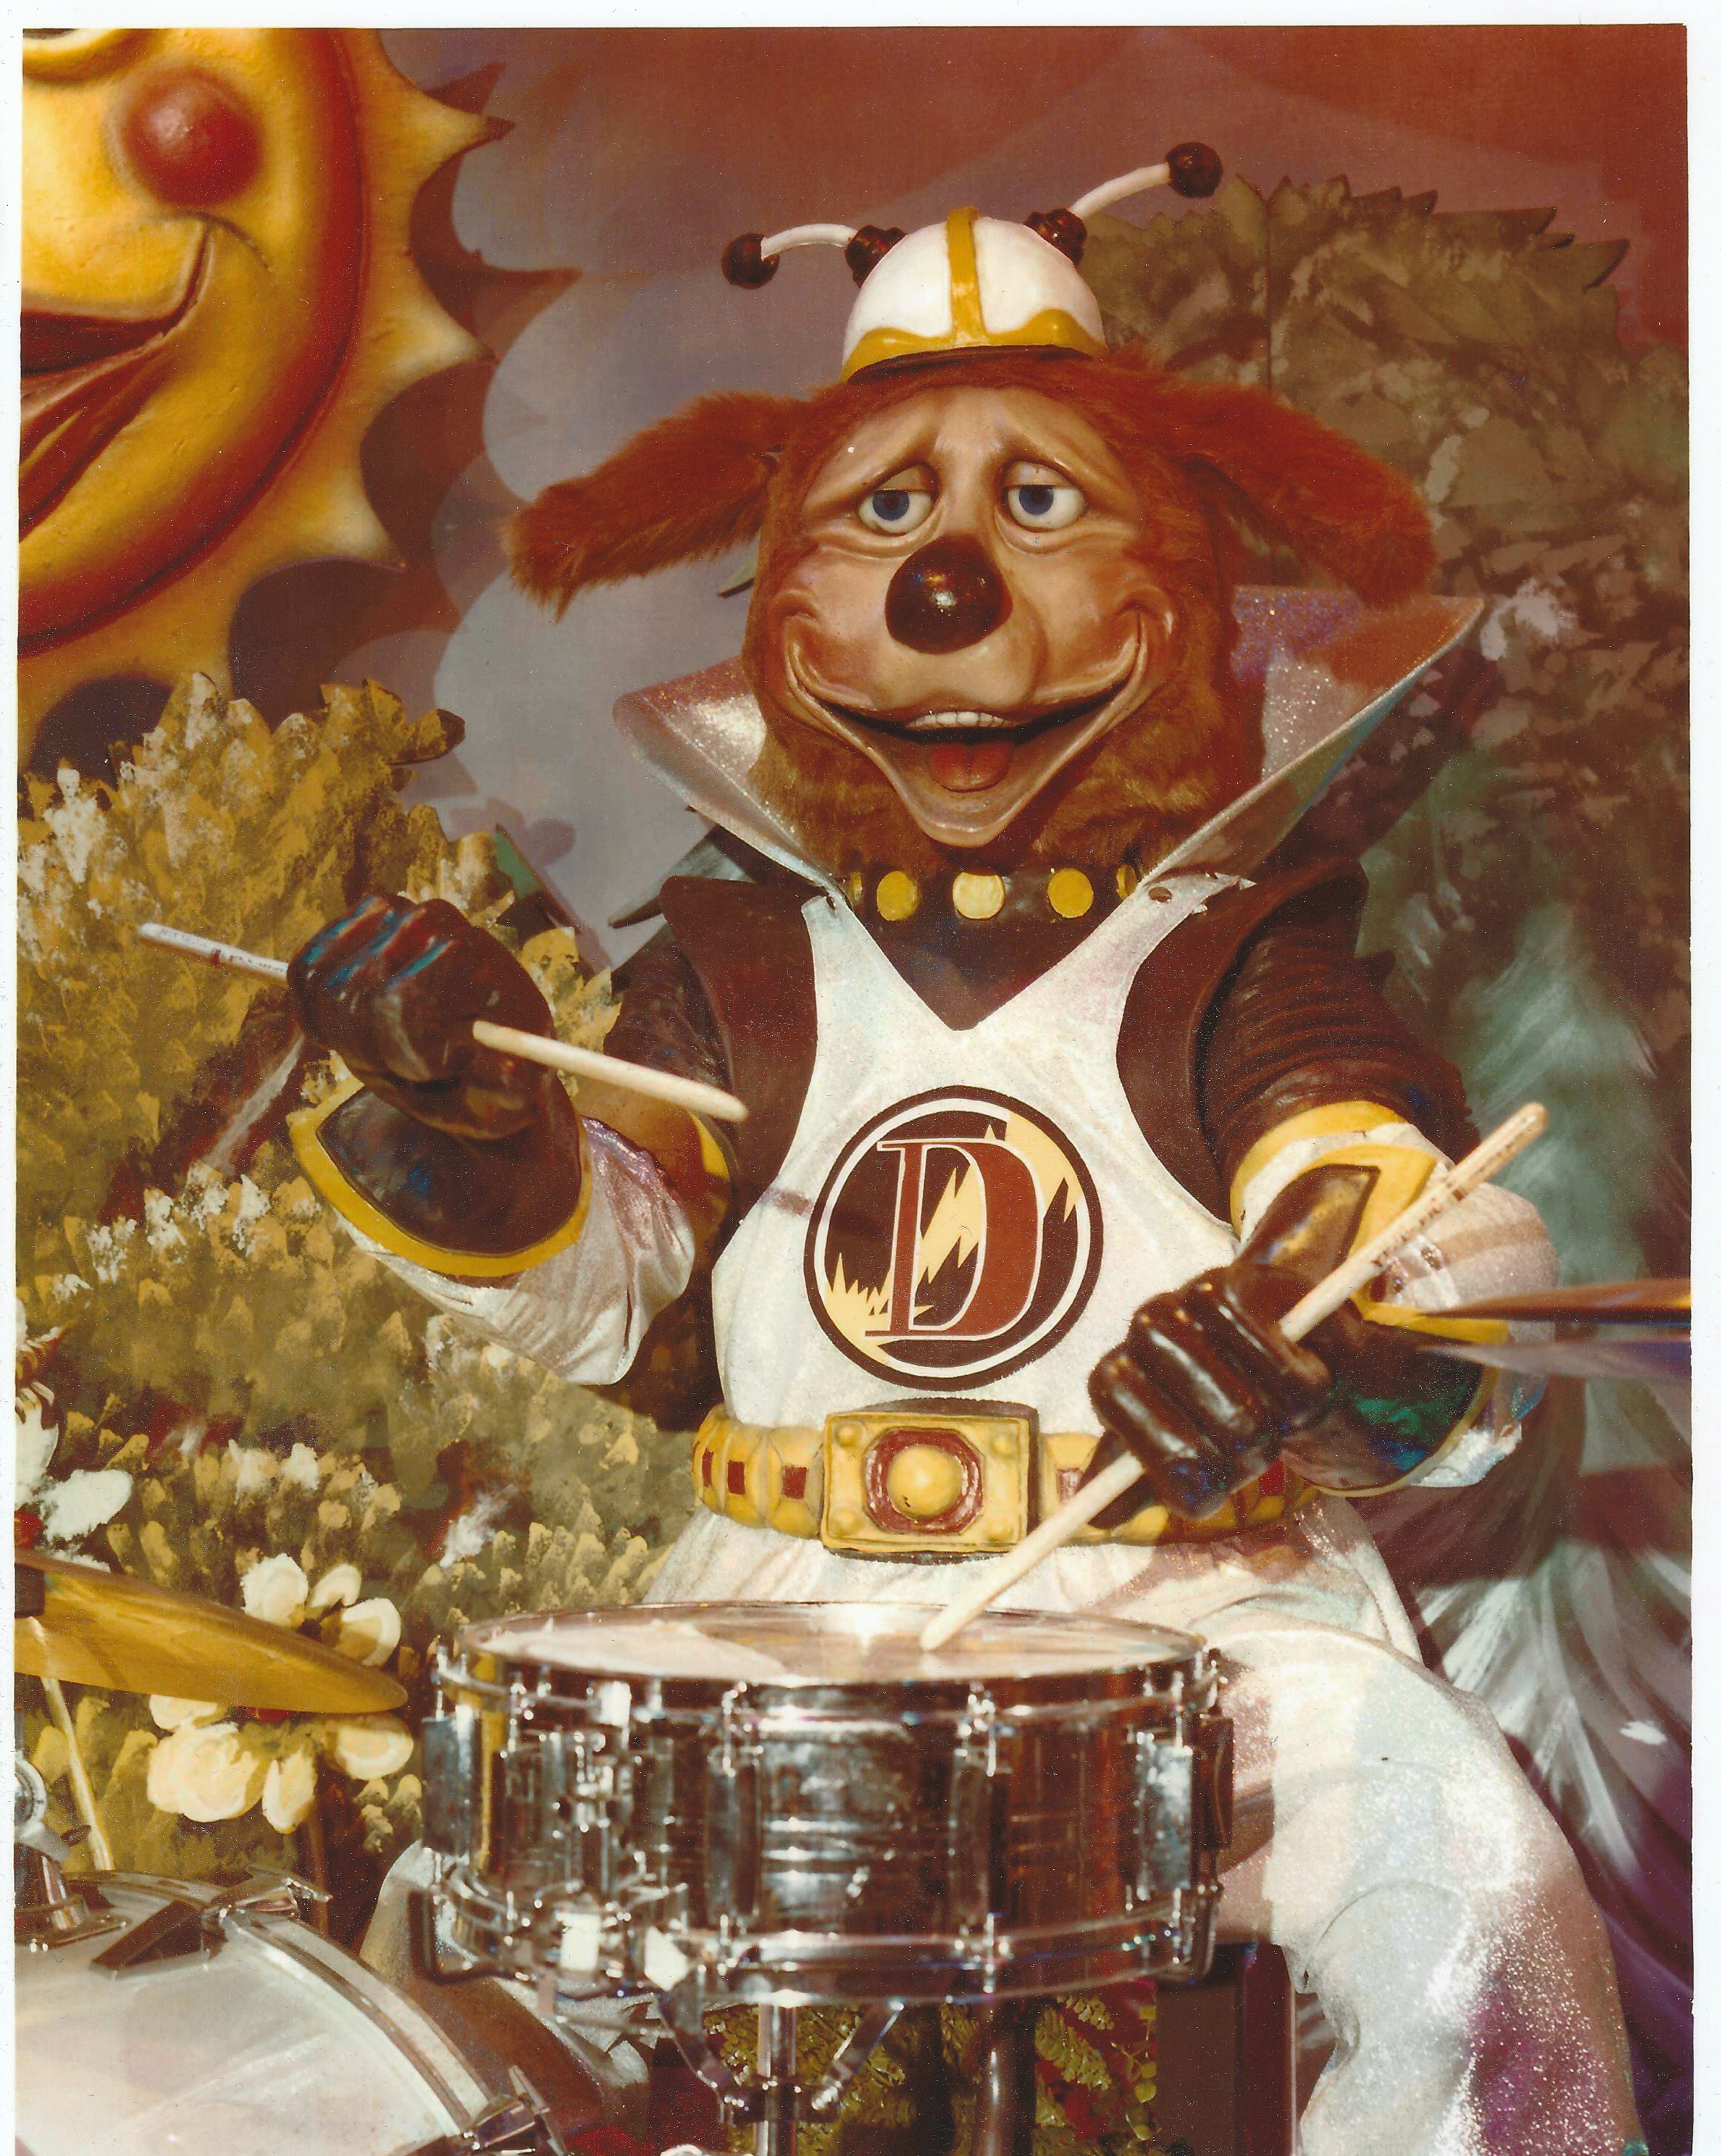 An early version of the dook larue animatronic.